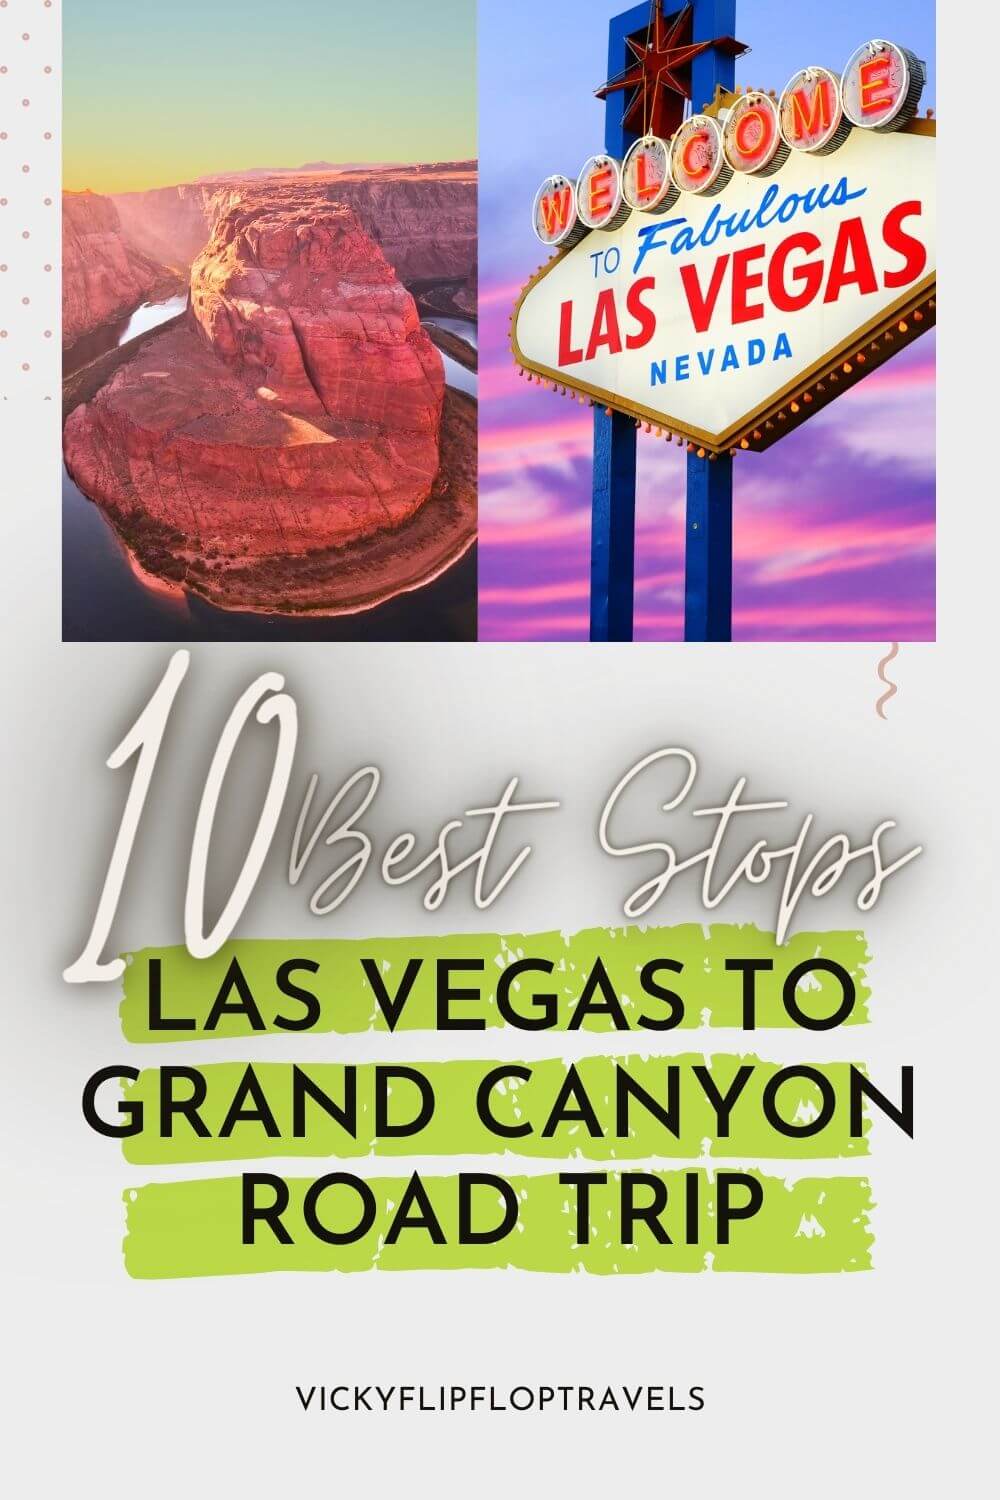 travel time by car from las vegas to grand canyon